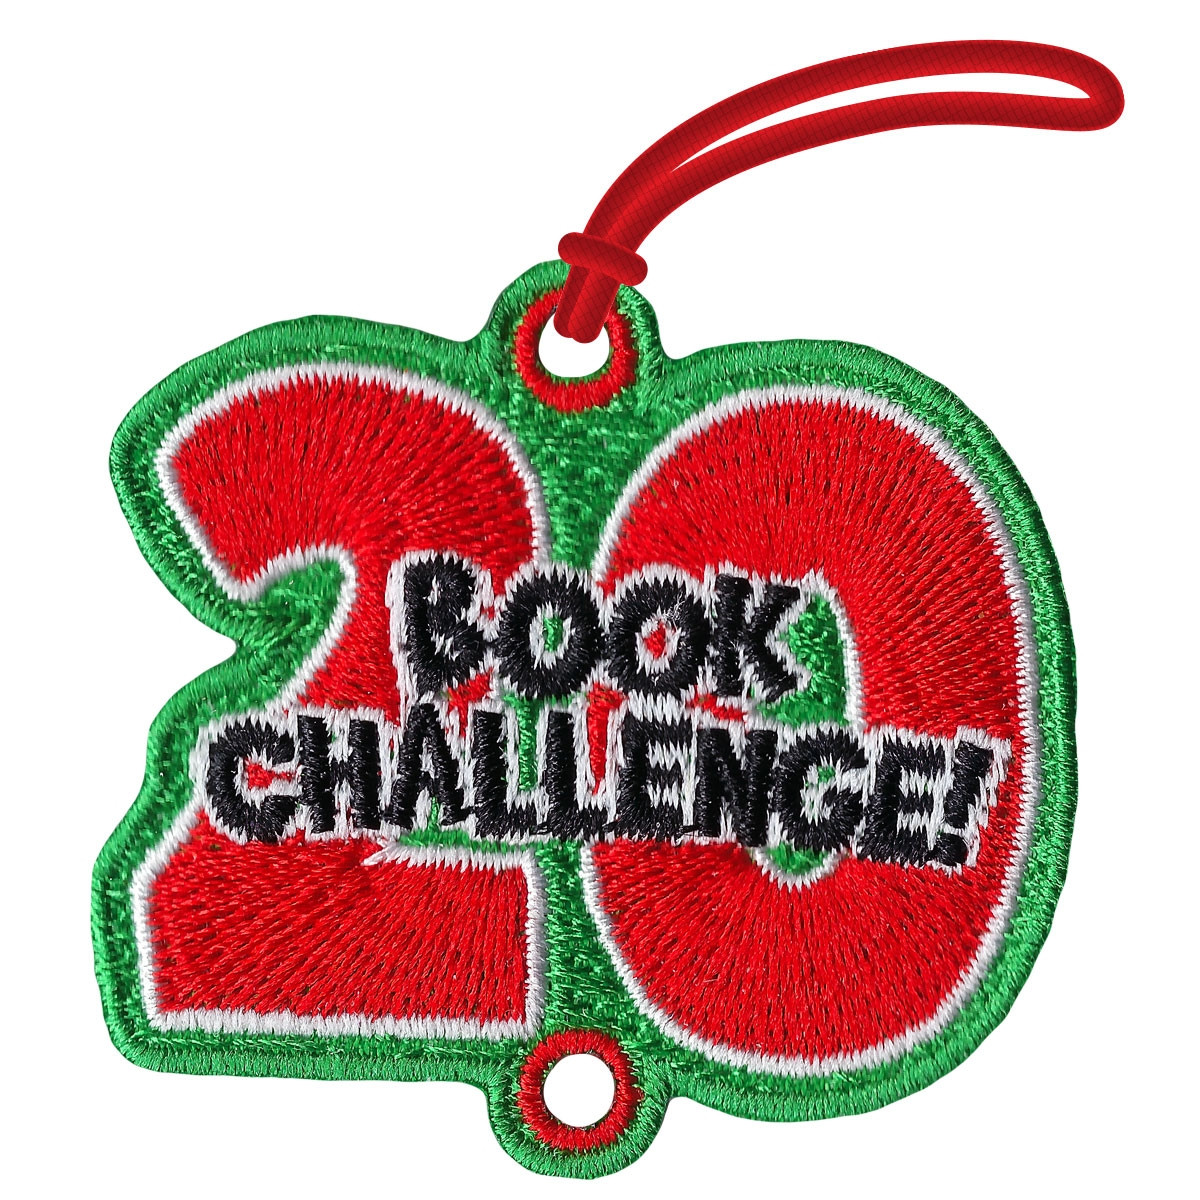 PATCH Tag – Book Challenge (20 Books)